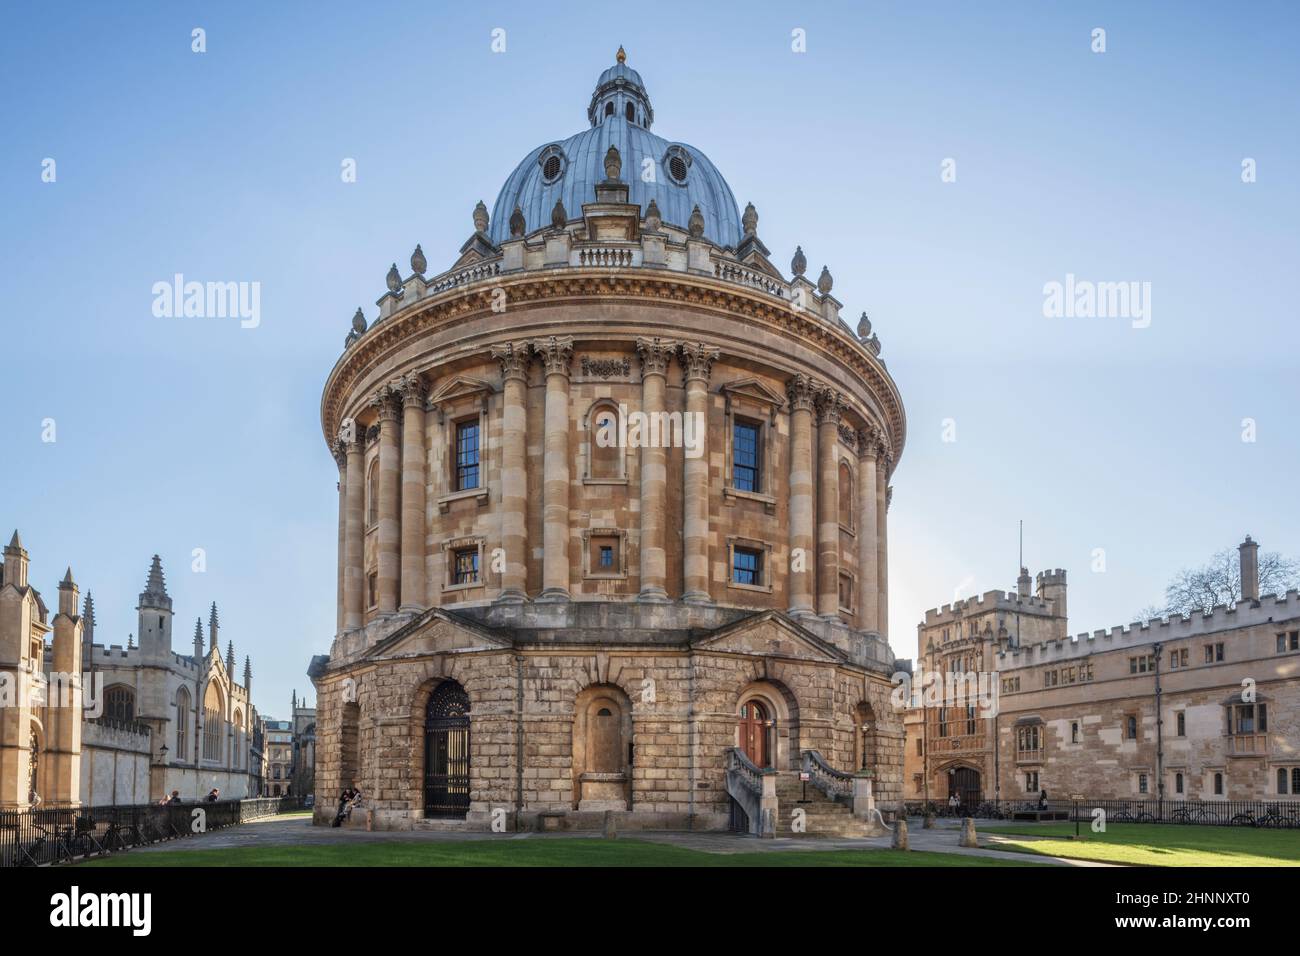 Radcliffe Camera (architect: James Gibbs), part of the Bodleian Library, Brasenose & All Soul's colleges right & left of frame, Oxford University, UK Stock Photo